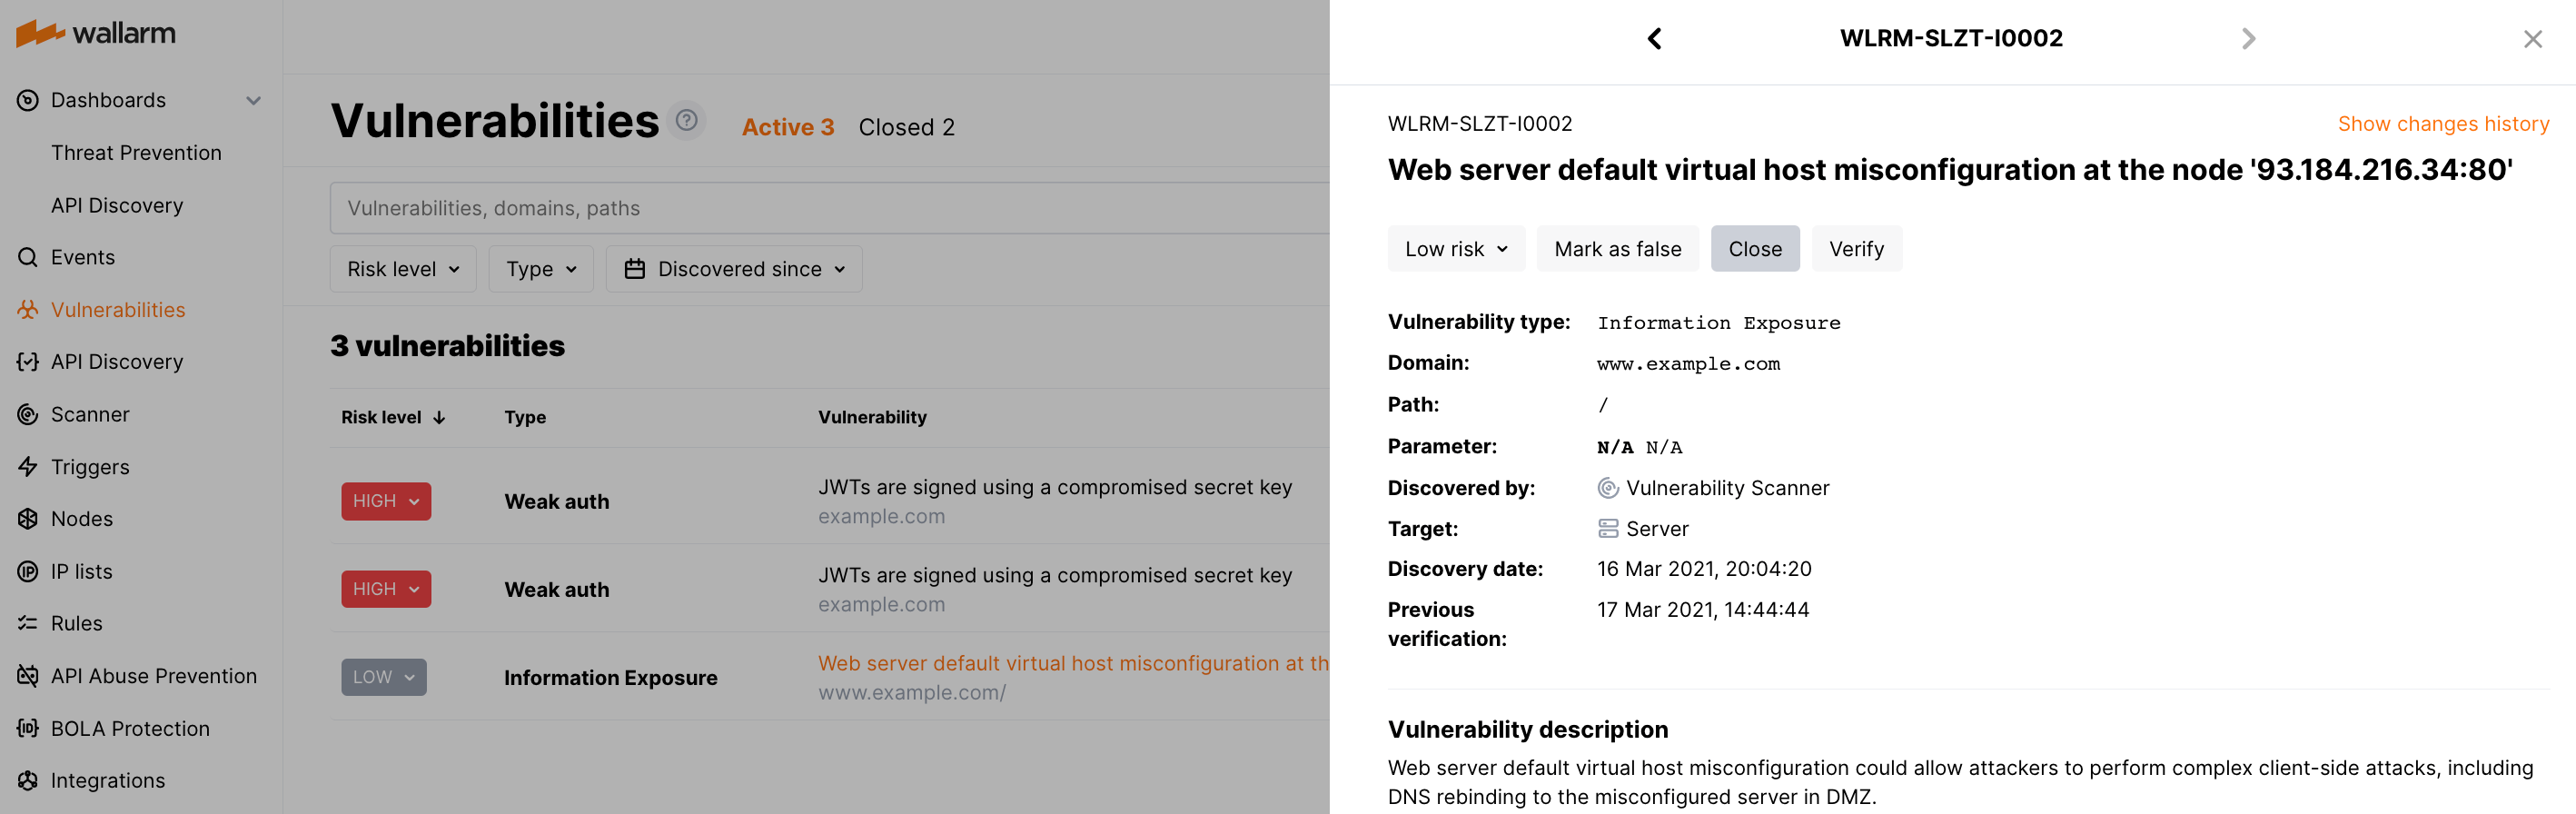 Closing a vulnerability on its page